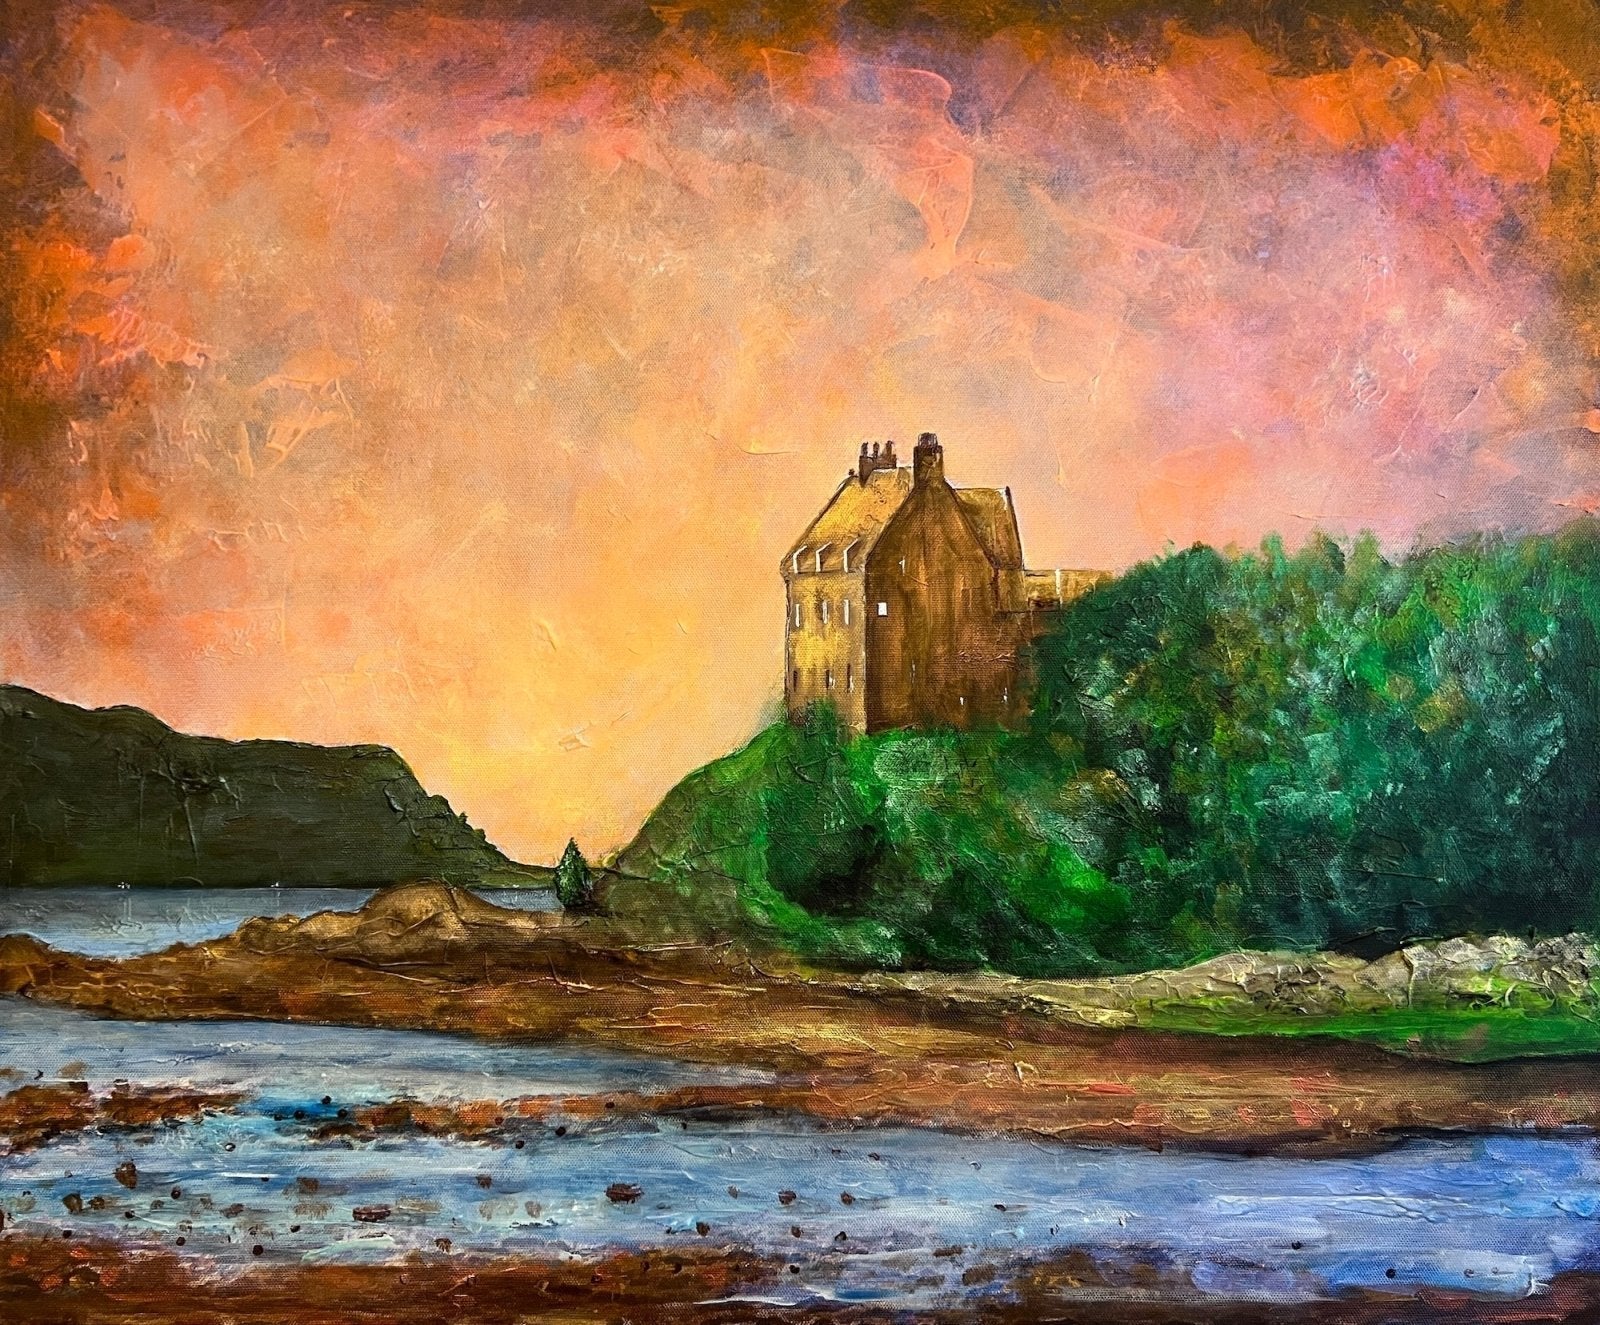 Scottish Landscape Painting Commissions-Original Paintings-Commission An Original Painting-Ask to be contacted by email-Paintings, Prints, Homeware, Art Gifts From Scotland By Scottish Artist Kevin Hunter